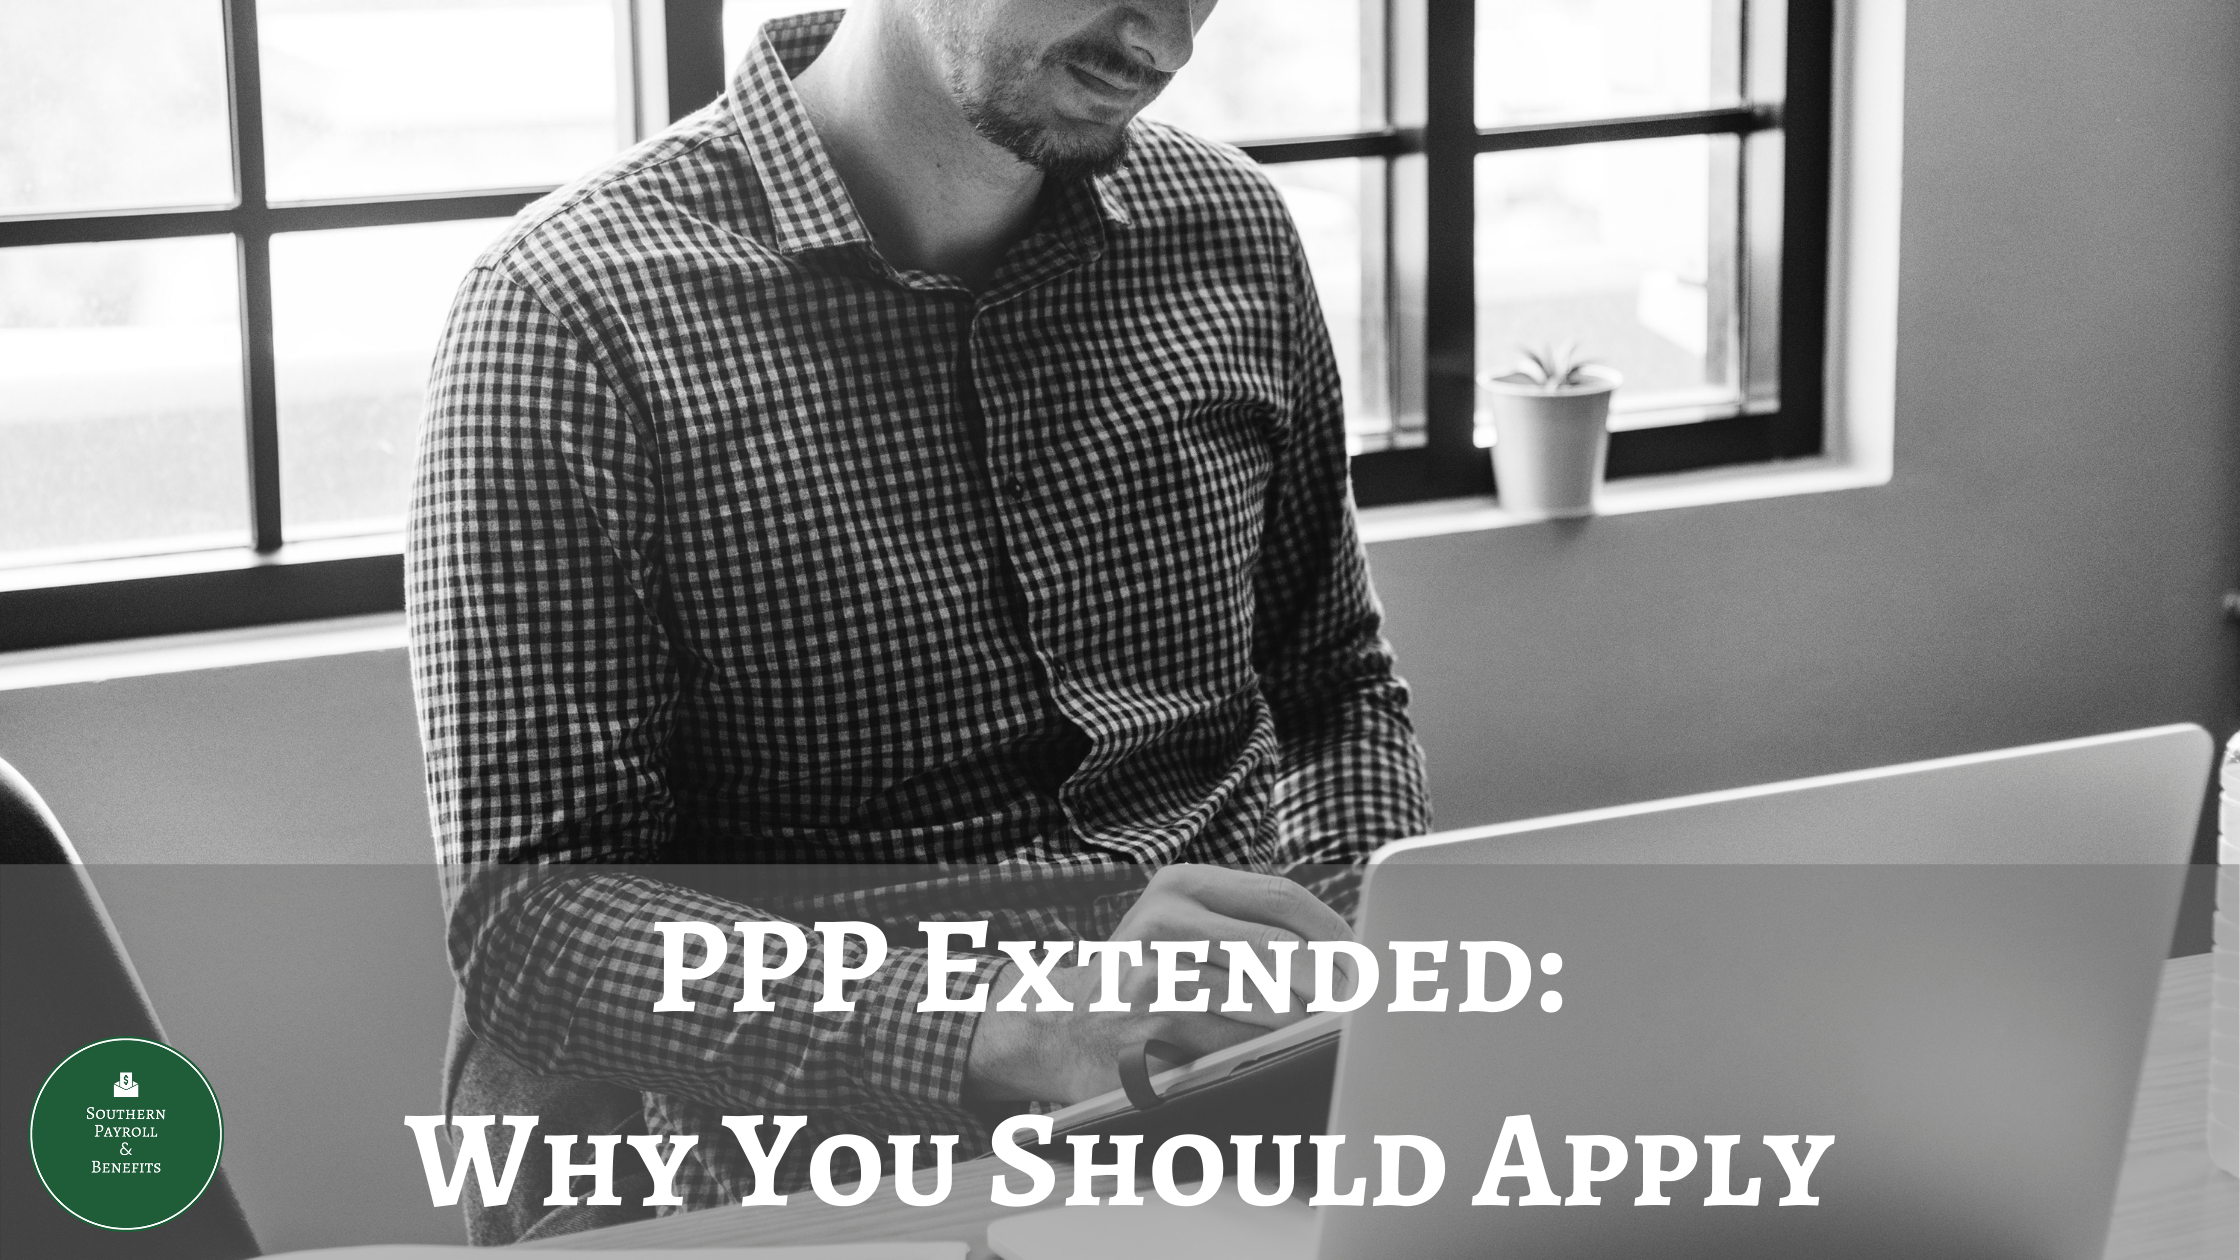 The PPP Was Extended: Expert Advice On Why You Should Apply